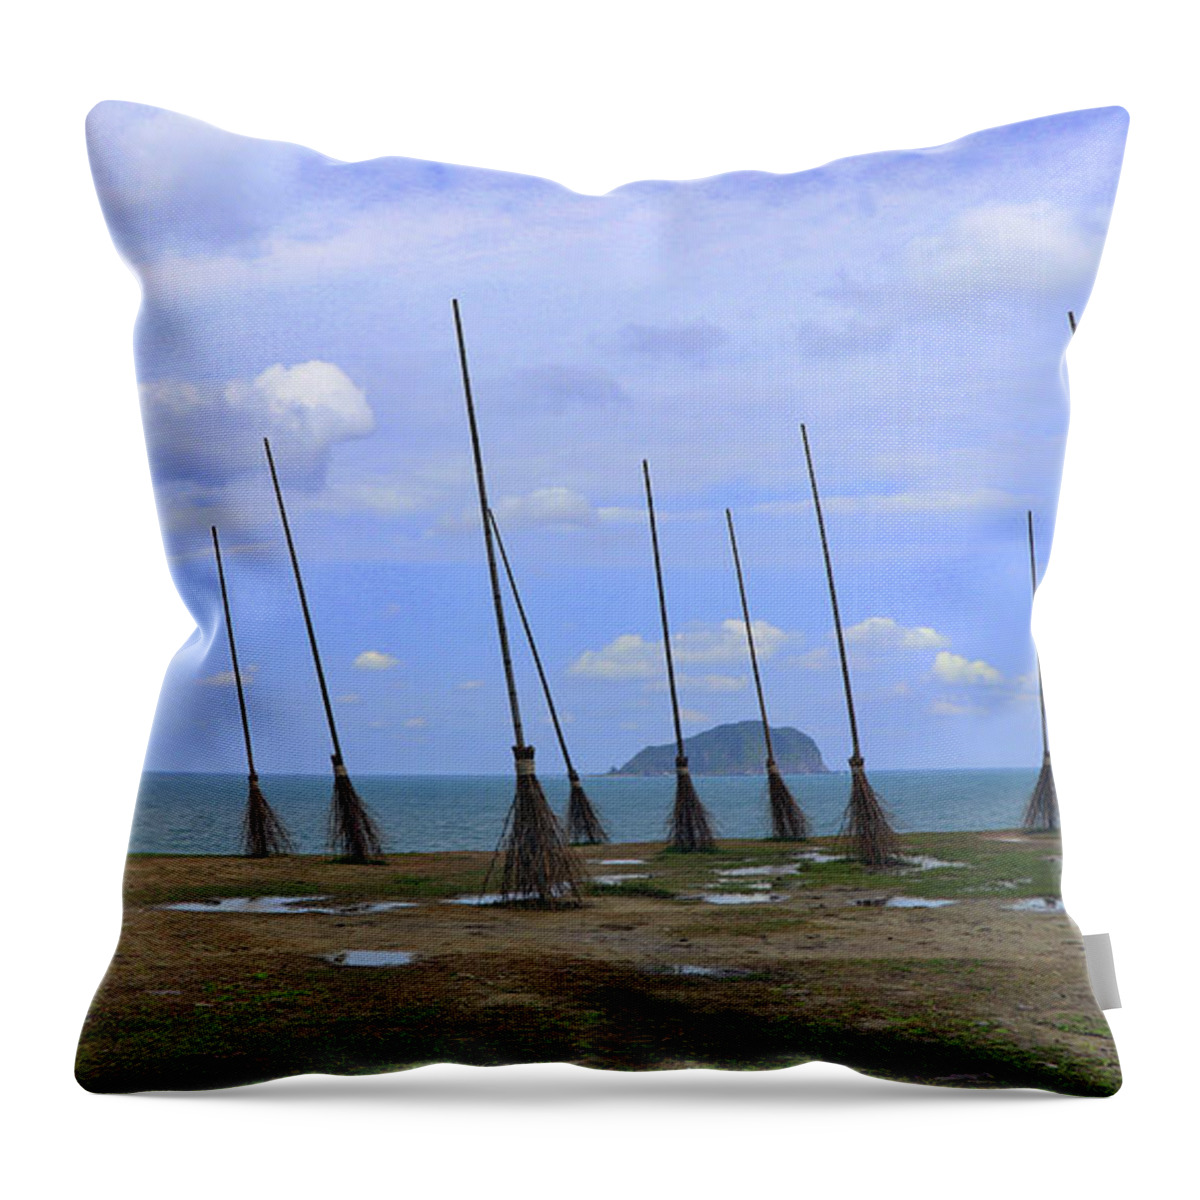 Keelung Taiwan Throw Pillow featuring the photograph Keelung Taiwan #2 by Paul James Bannerman